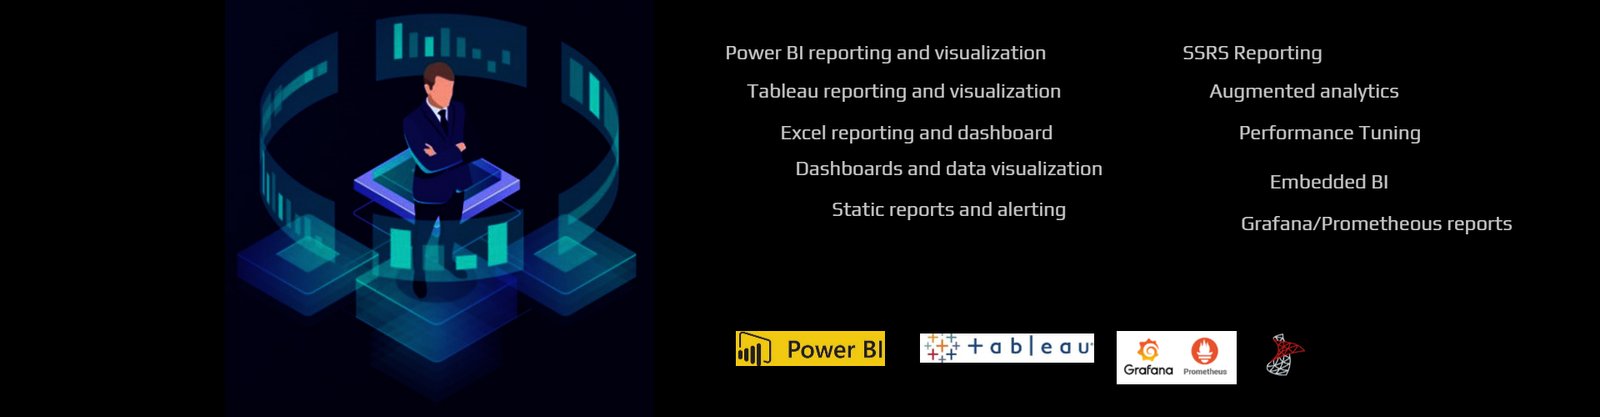 Reporting and Visualization Capabilities